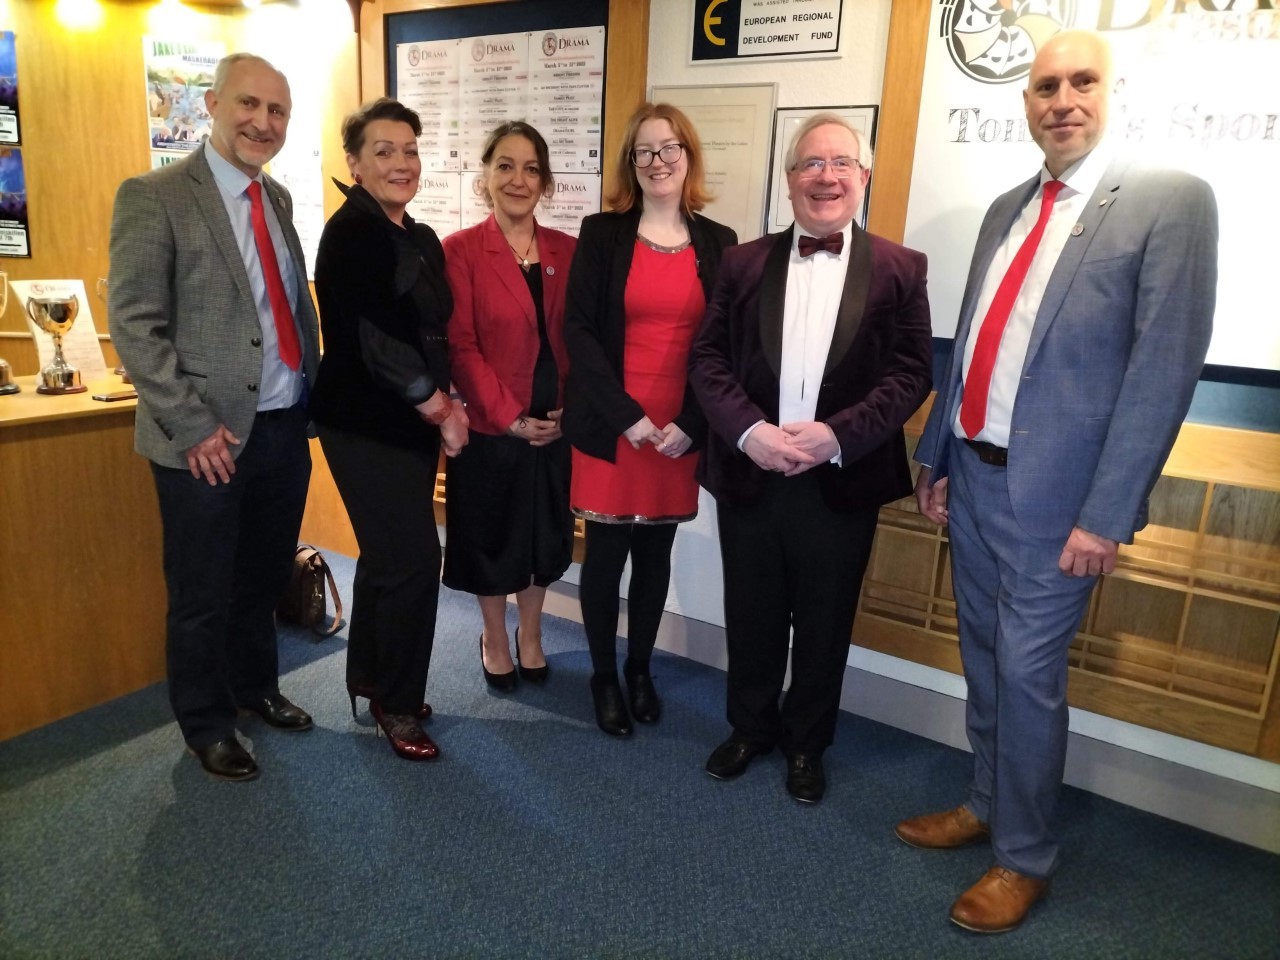 Enniskillen Drama Festival Committee on the final night of this years festival pictured from left to right: Paul Doherty, Tracey Kernaghan, Christine Maher Irvine, Amanda Finch, Adjudicator David Grant and Festival Director Dave Rees.